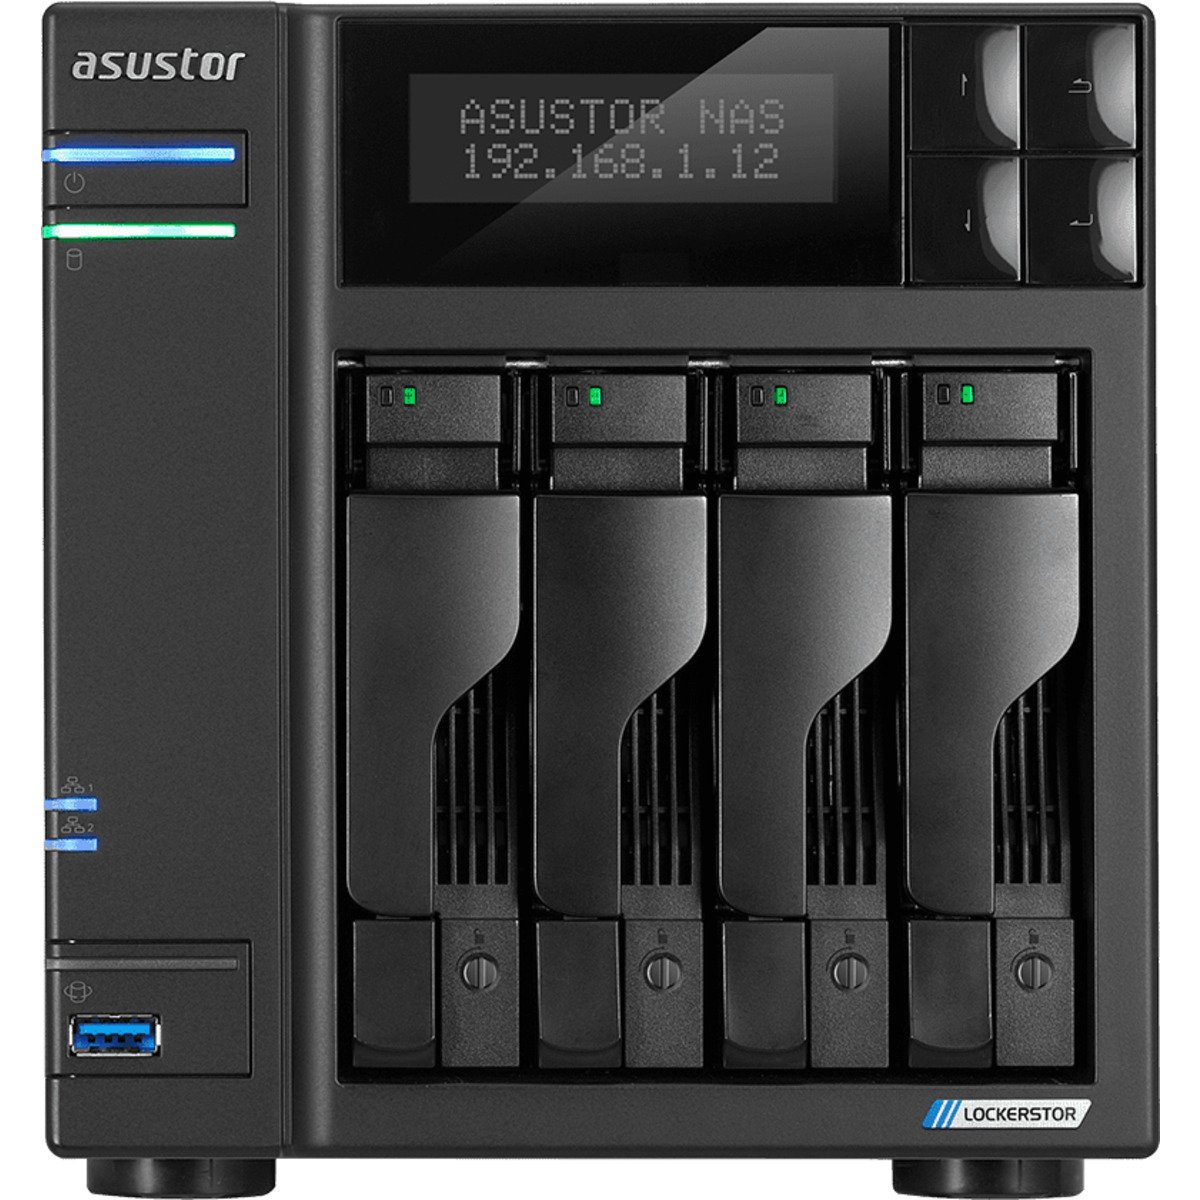 ASUSTOR AS6604T Lockerstor 4 64tb 4-Bay Desktop Multimedia / Power User / Business NAS - Network Attached Storage Device 4x16tb Seagate IronWolf Pro ST16000NT001 3.5 7200rpm SATA 6Gb/s HDD NAS Class Drives Installed - Burn-In Tested - ON SALE - FREE RAM UPGRADE AS6604T Lockerstor 4